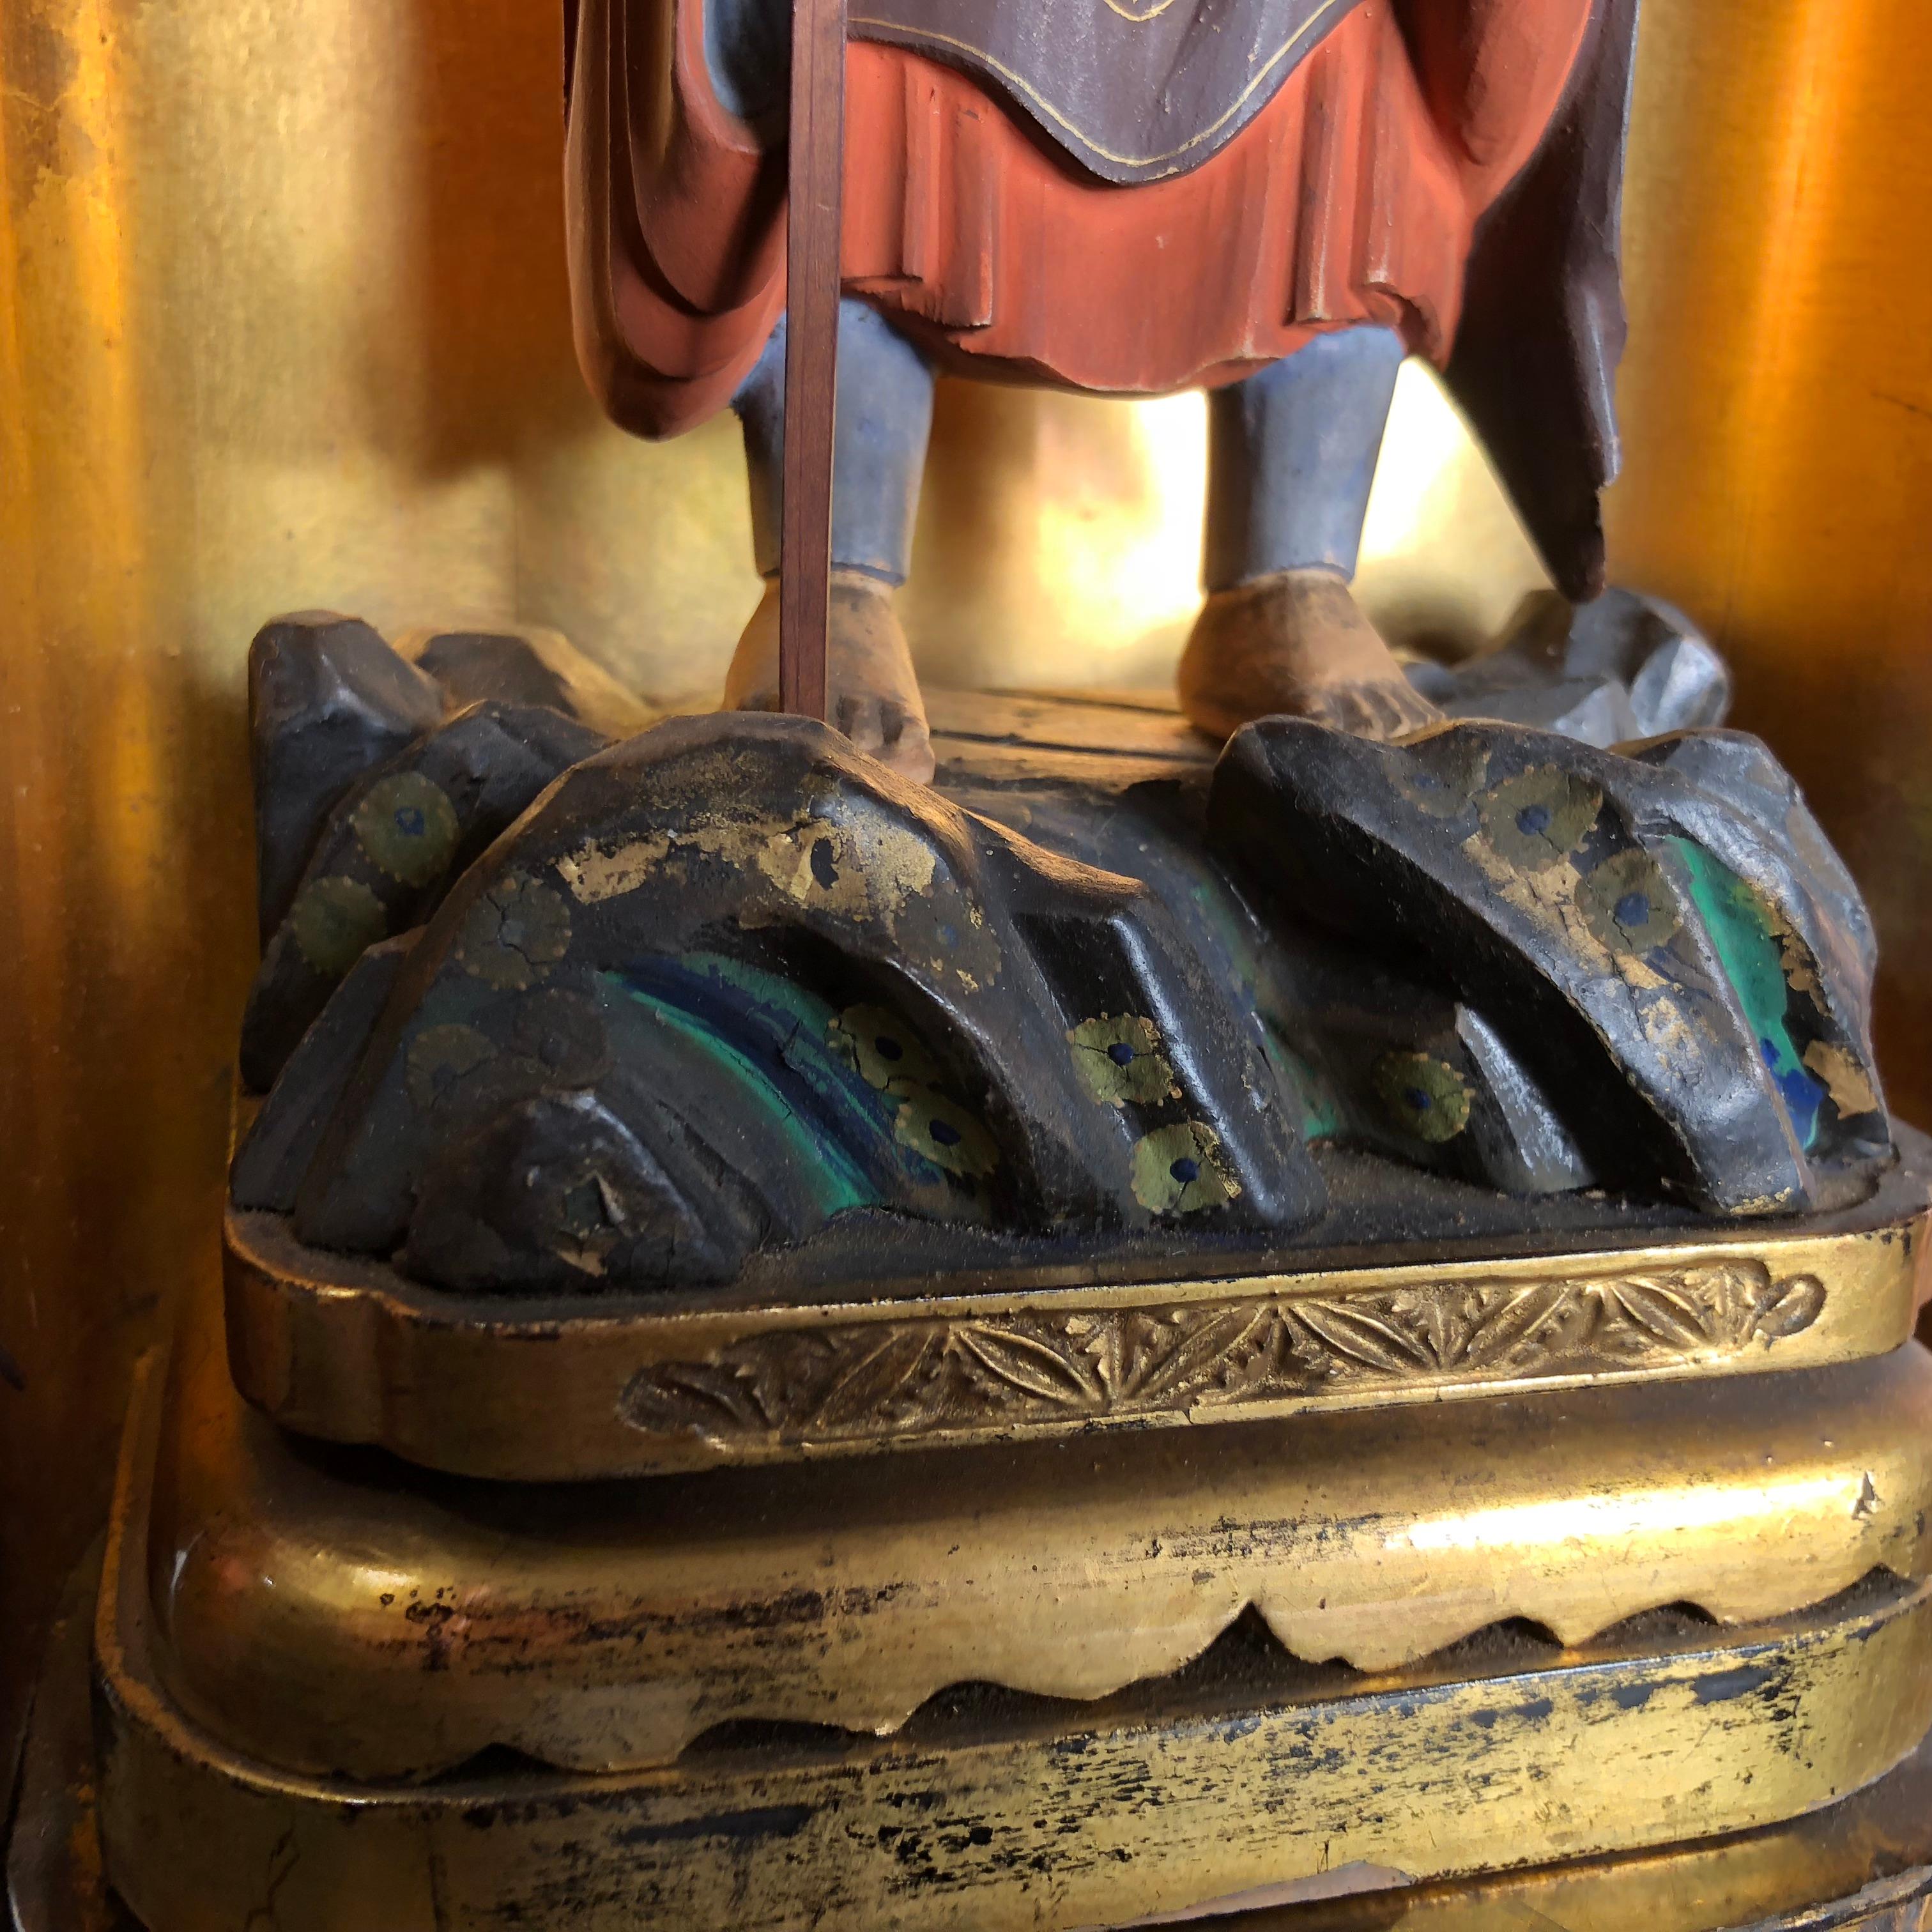 20th Century Japan Fine Old Buddhist Figure in Original Gold and Black Lacquer Box , Zushi